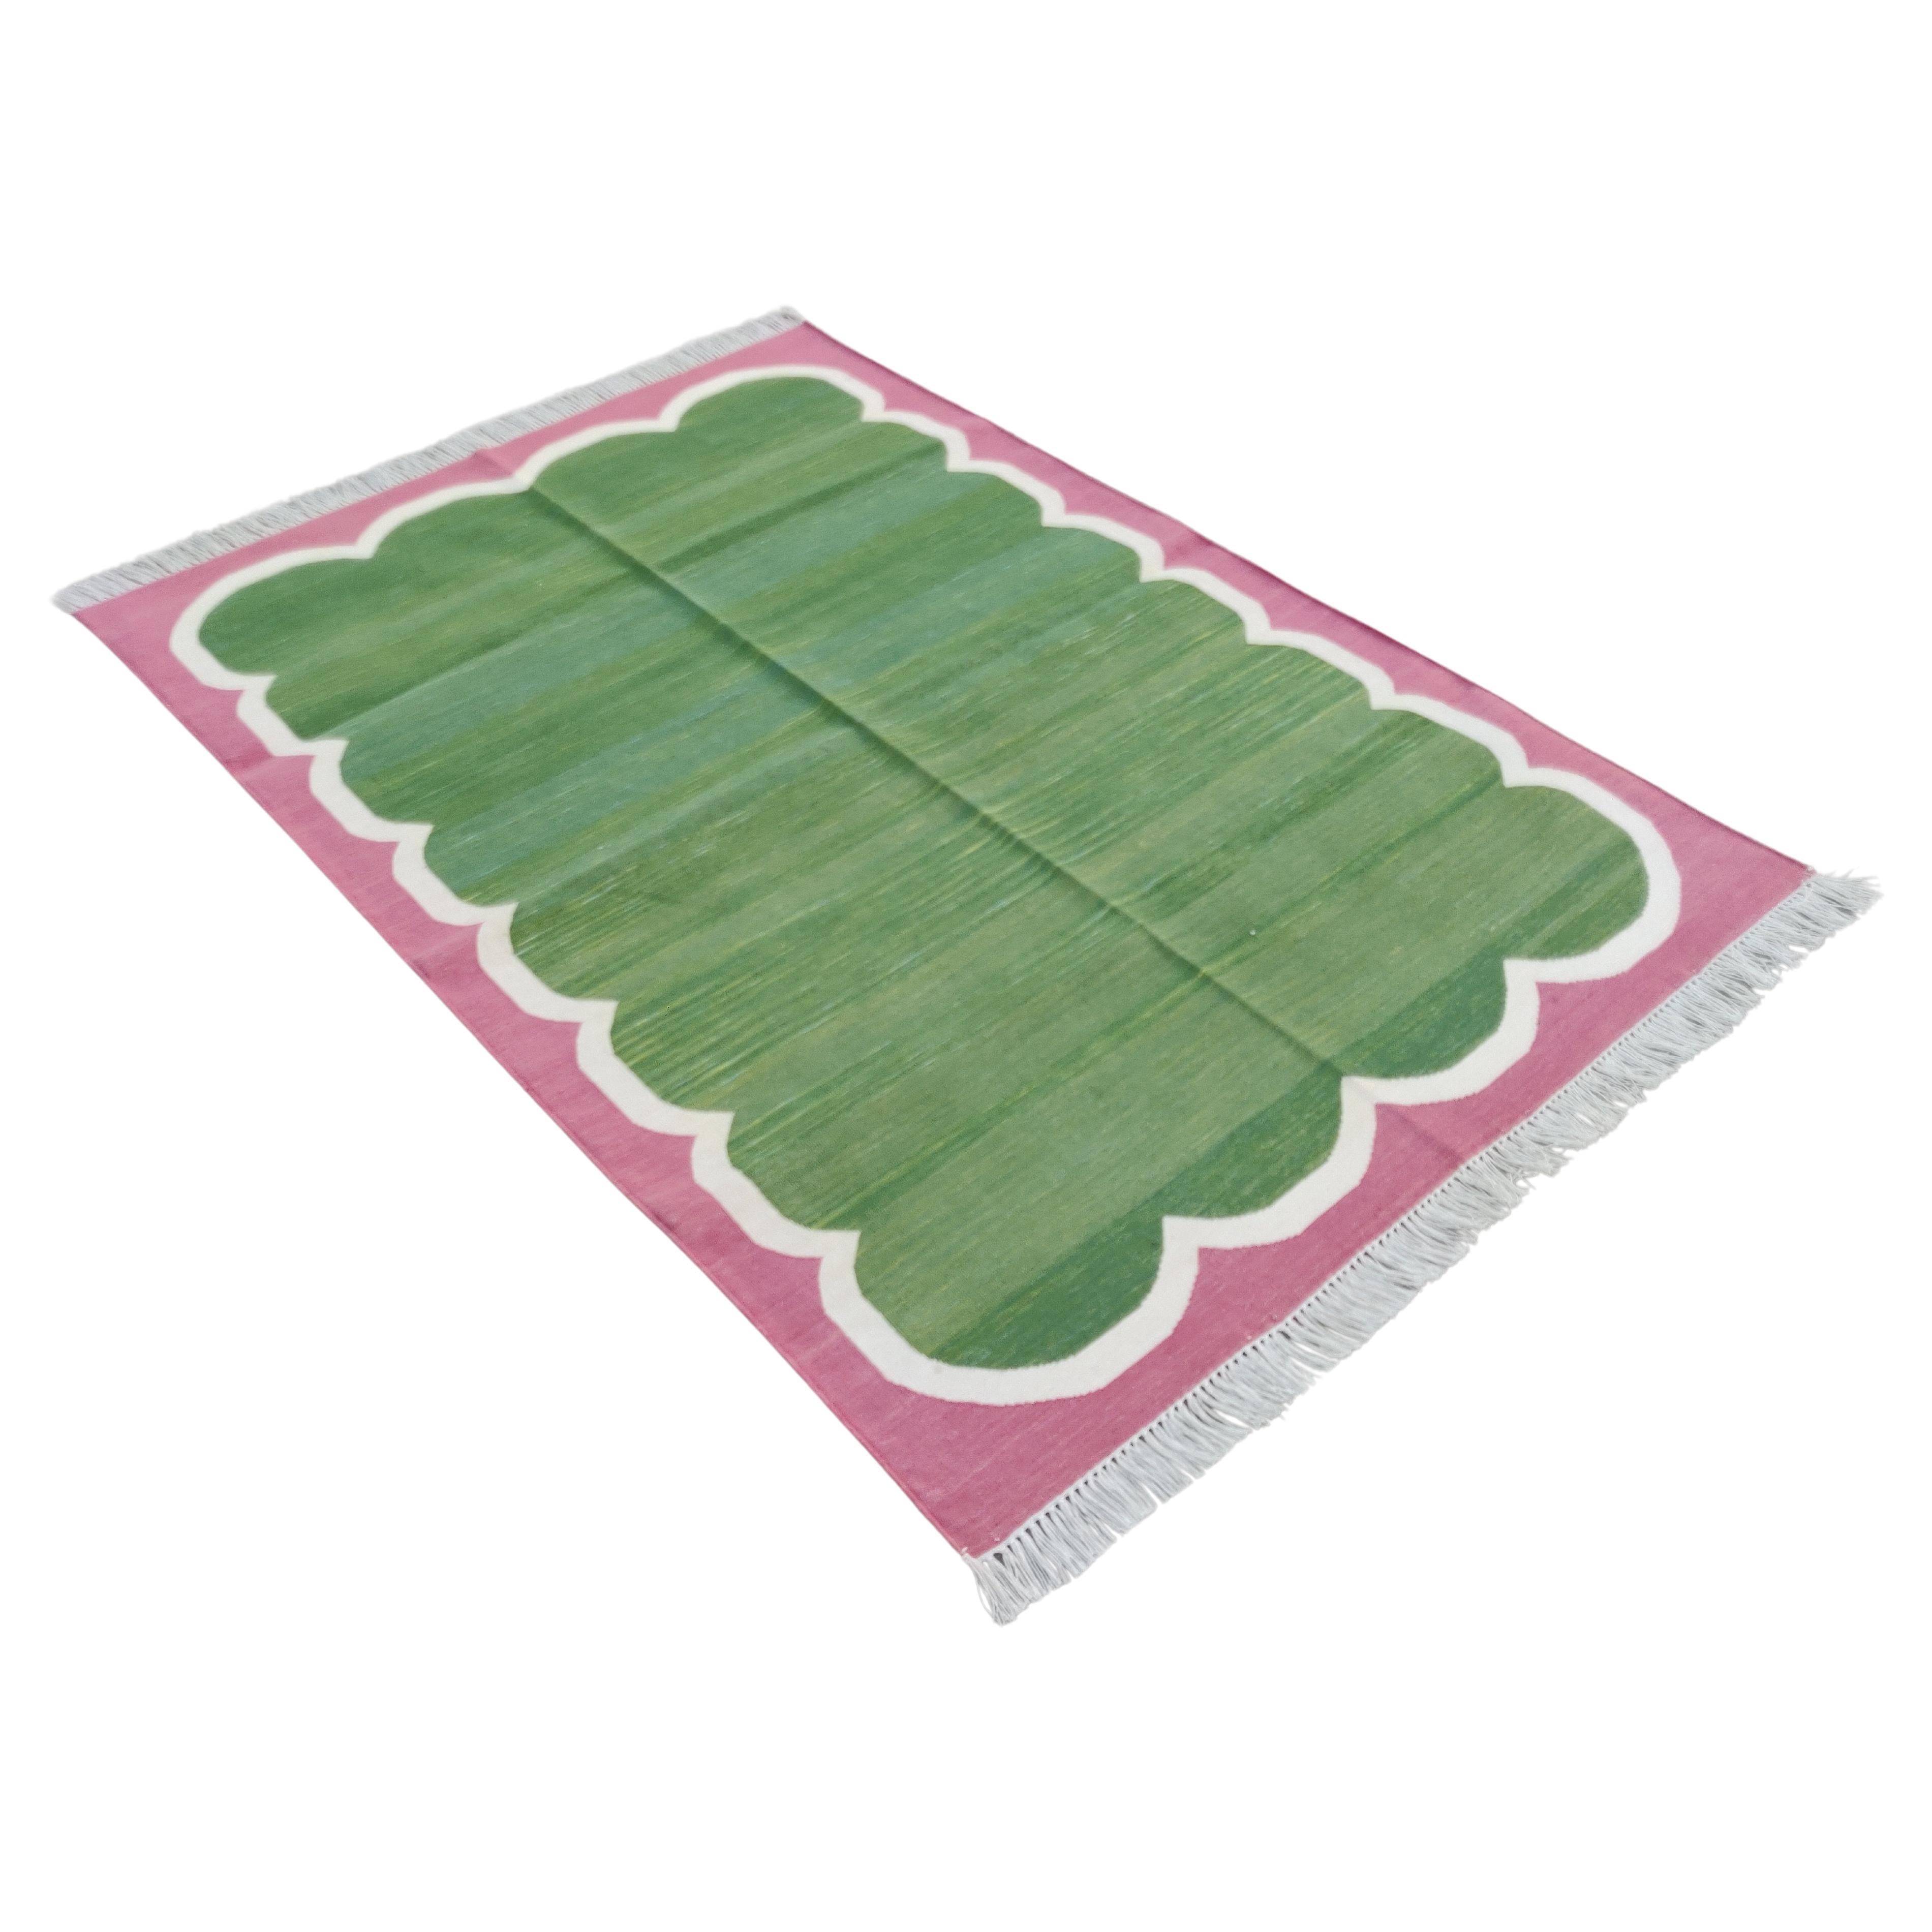 Handmade Cotton Area Flat Weave Rug, 5x7 Green And Pink Scallop Striped Dhurrie For Sale